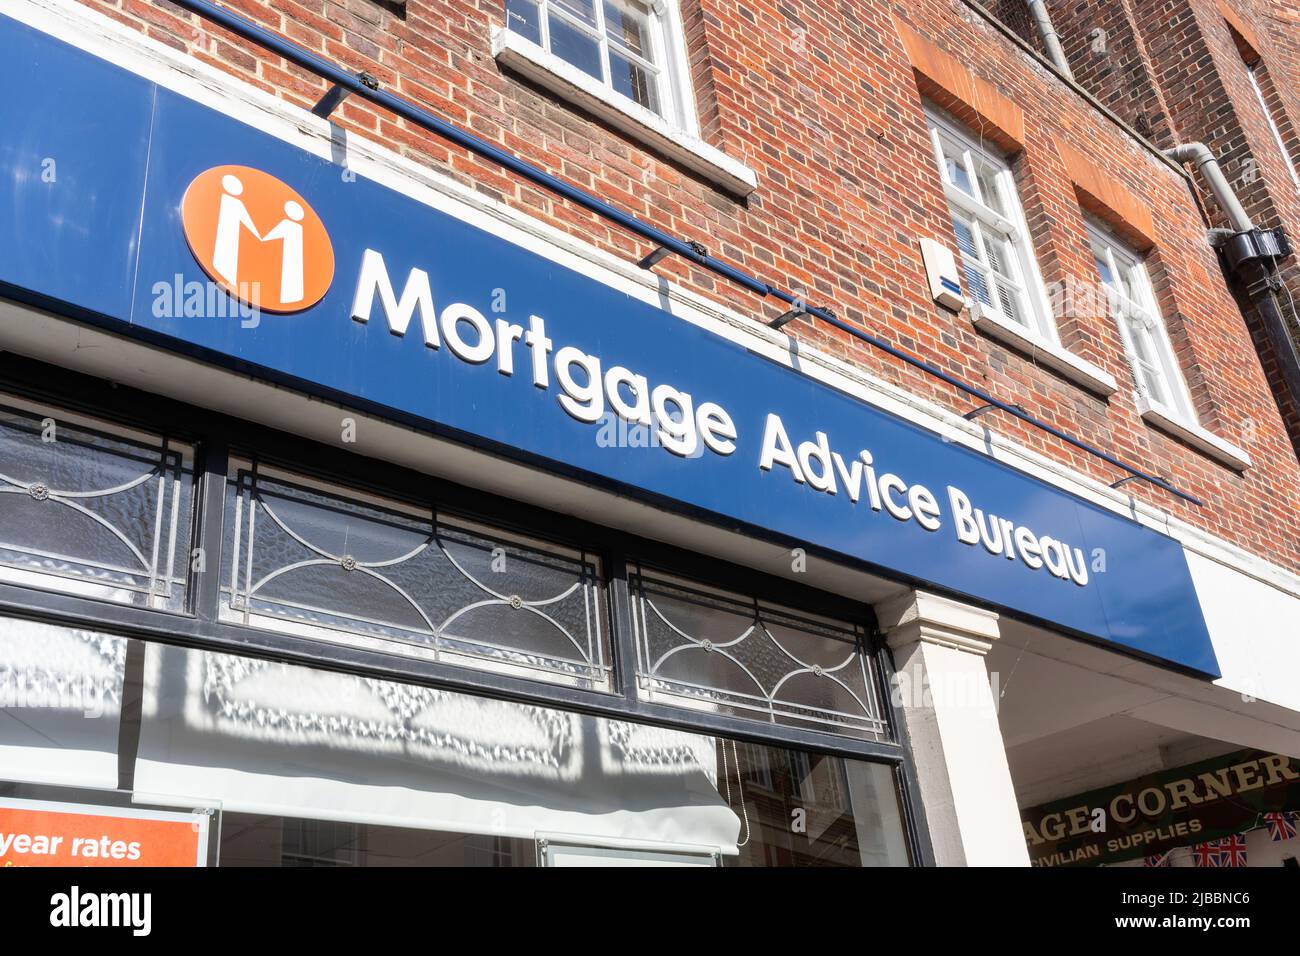 Shop front and logo for the Mortgage Advice Bureau on Church Street in Basingstoke. UK. Theme - mortgages, housing market, property market Stock Photo